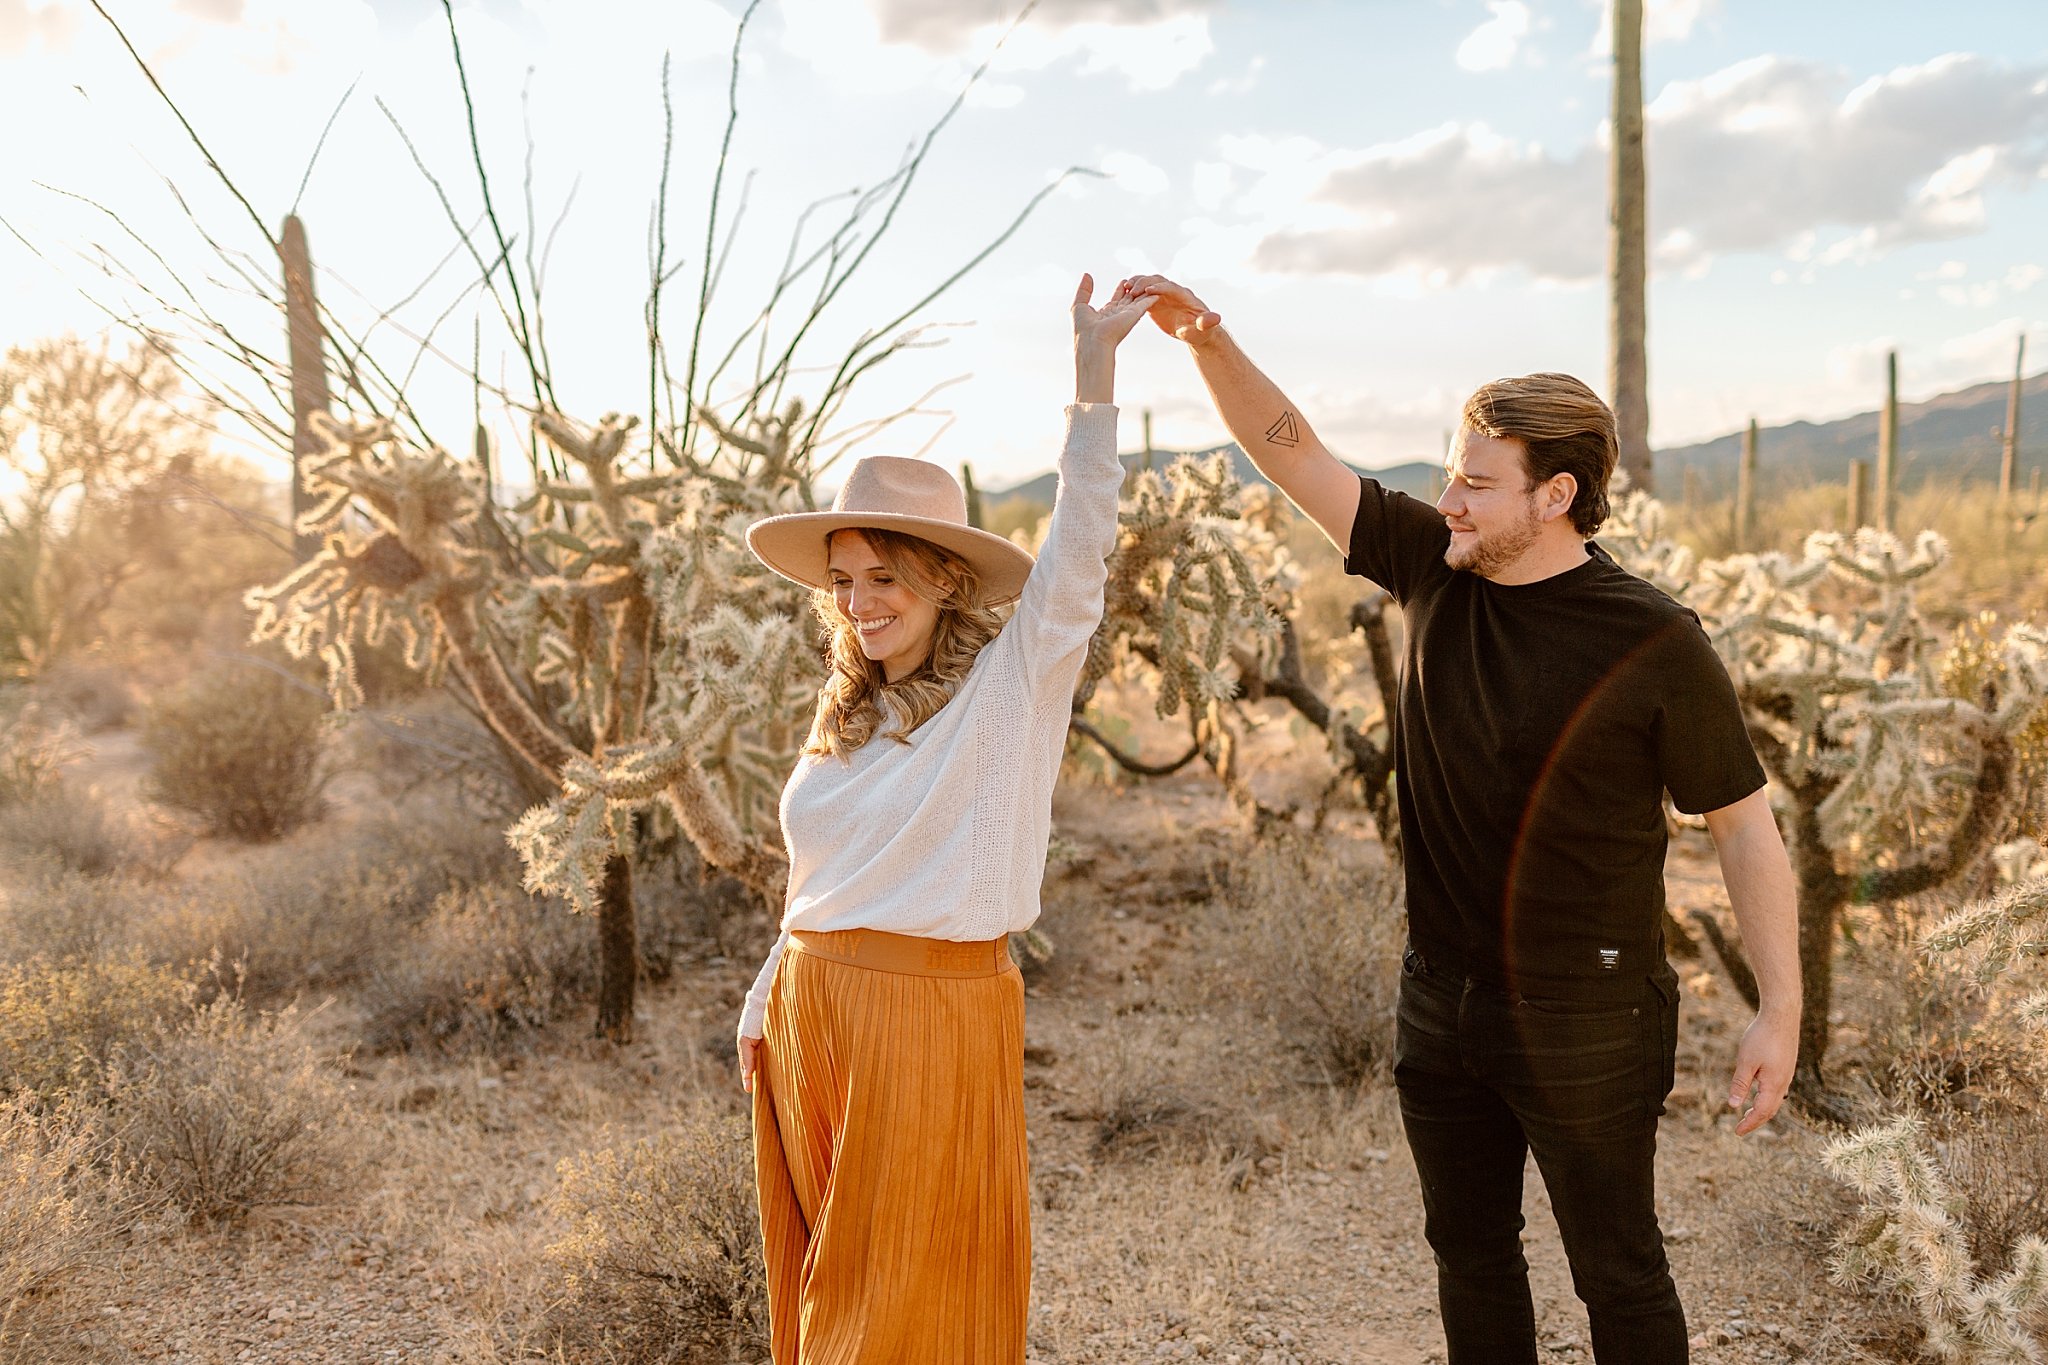  couple dances together in the desert by Arizona Couples Photographer 